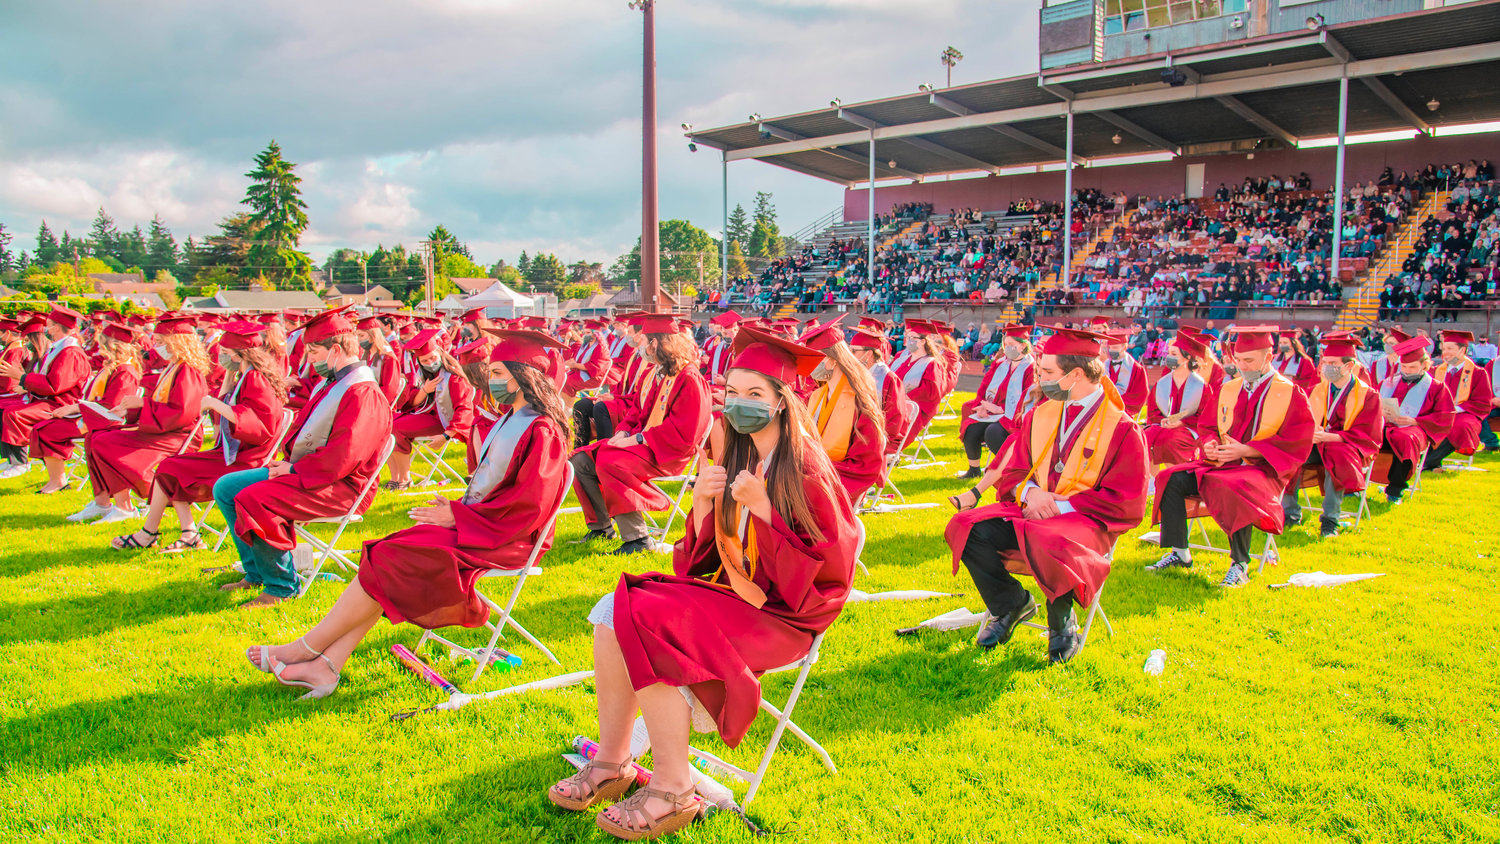 Graduates prepare to receive their diplomas during a ceremony in Bearcat Stadium at W.F. West in Chehalis on Saturday.